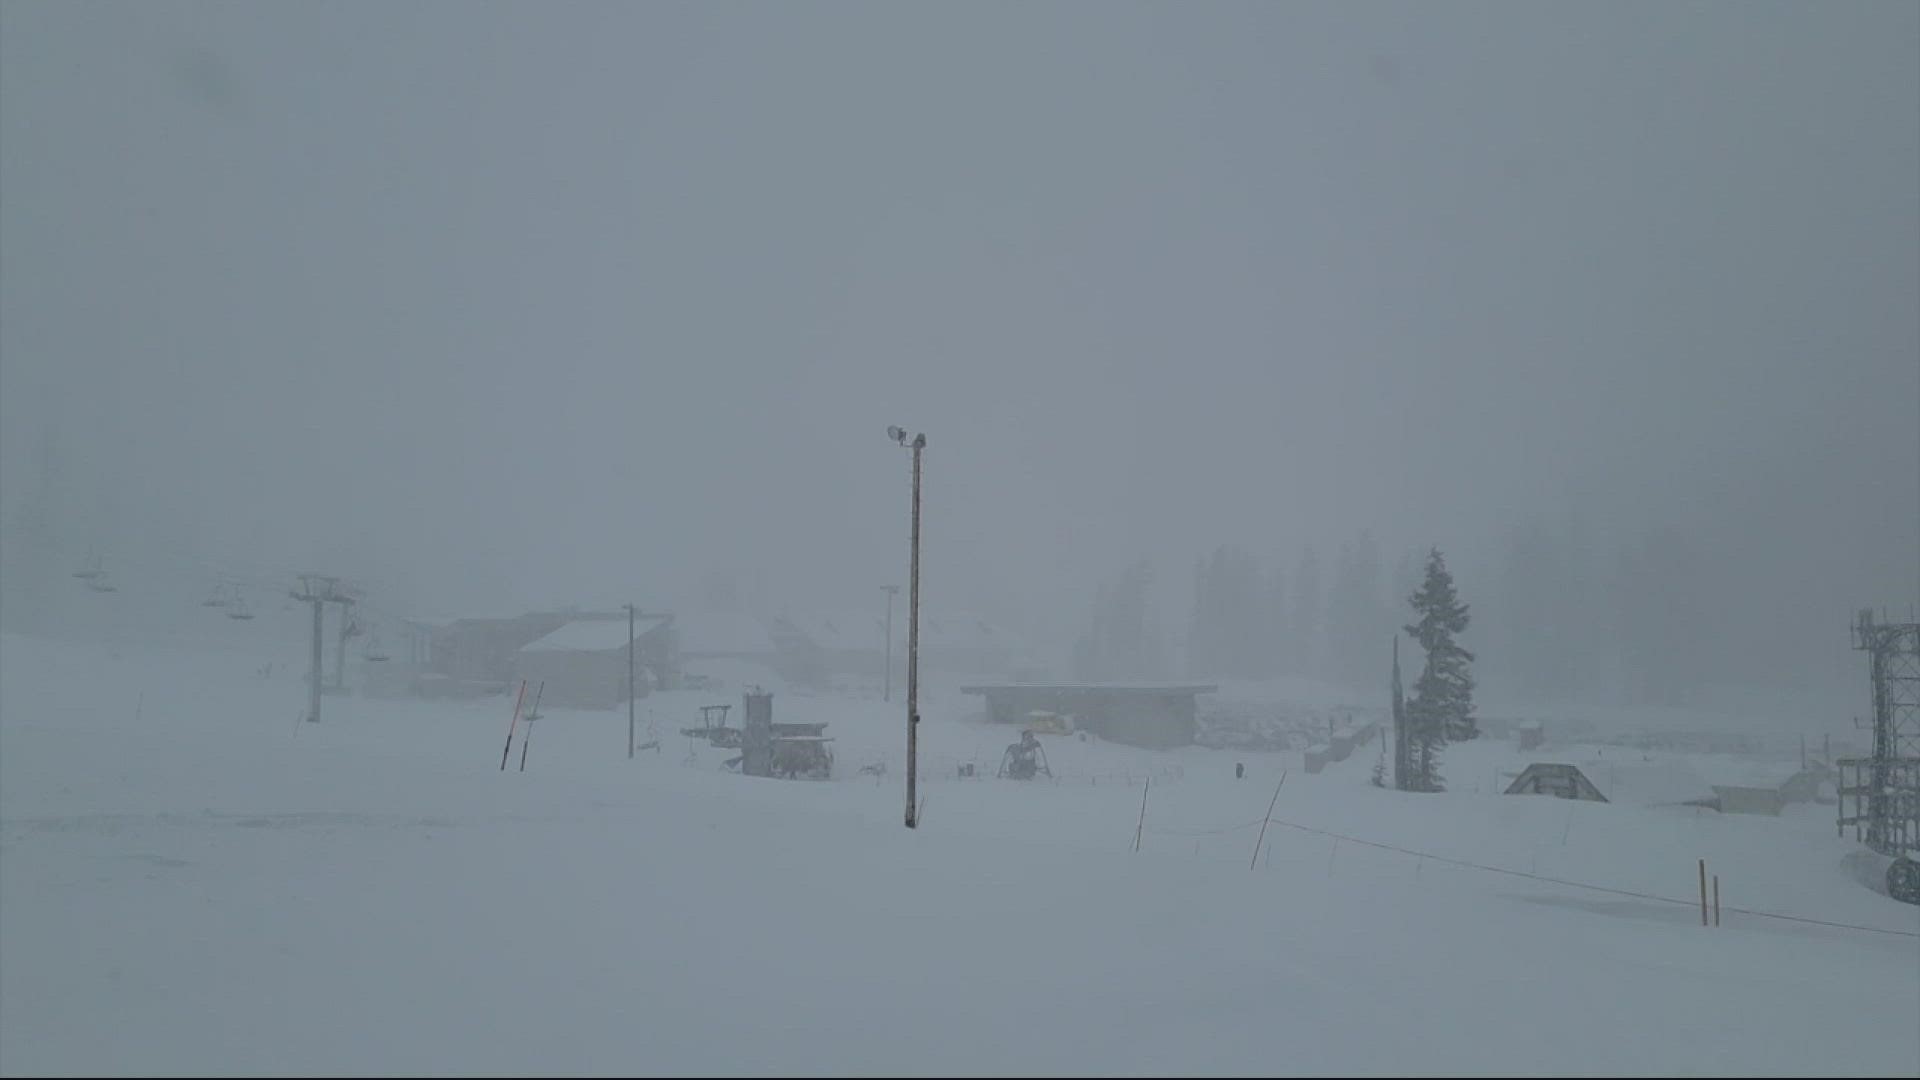 Mount Hood Meadows had fresh powder on every run Monday after a historic spring snowstorm in the region.